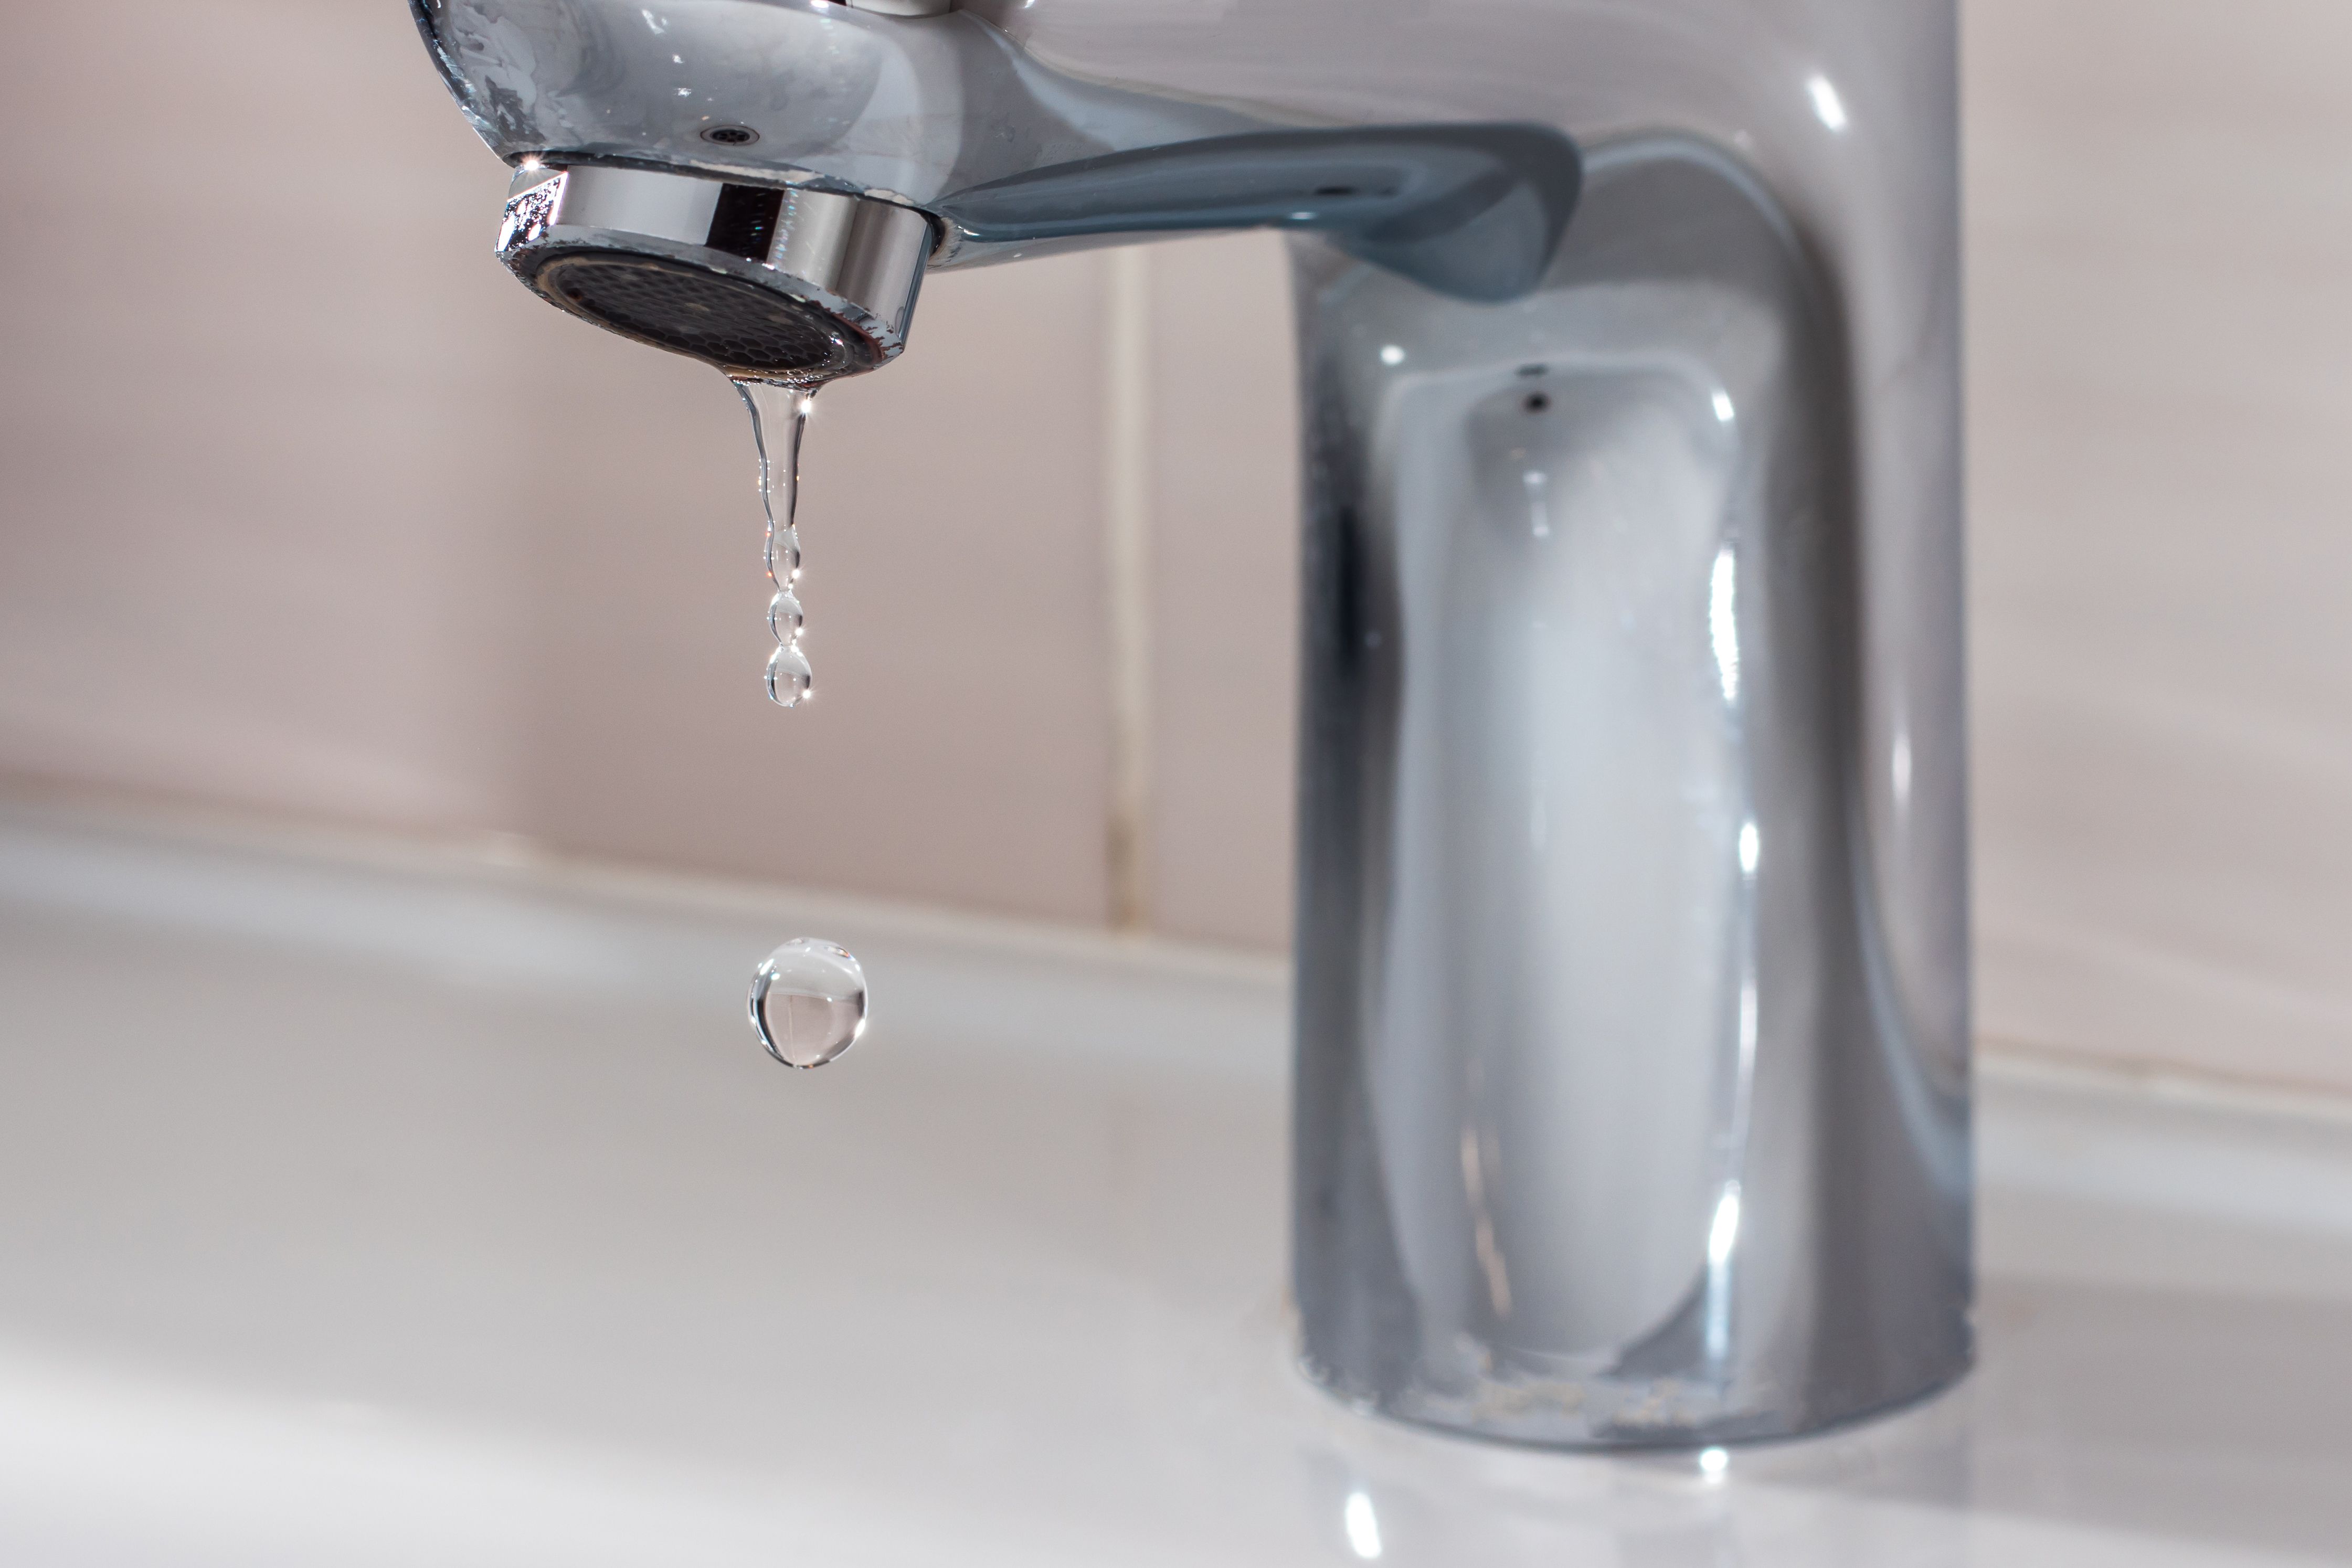 How to Fix a Leaky Faucet - 23 Easy Steps to Fix a Faucet